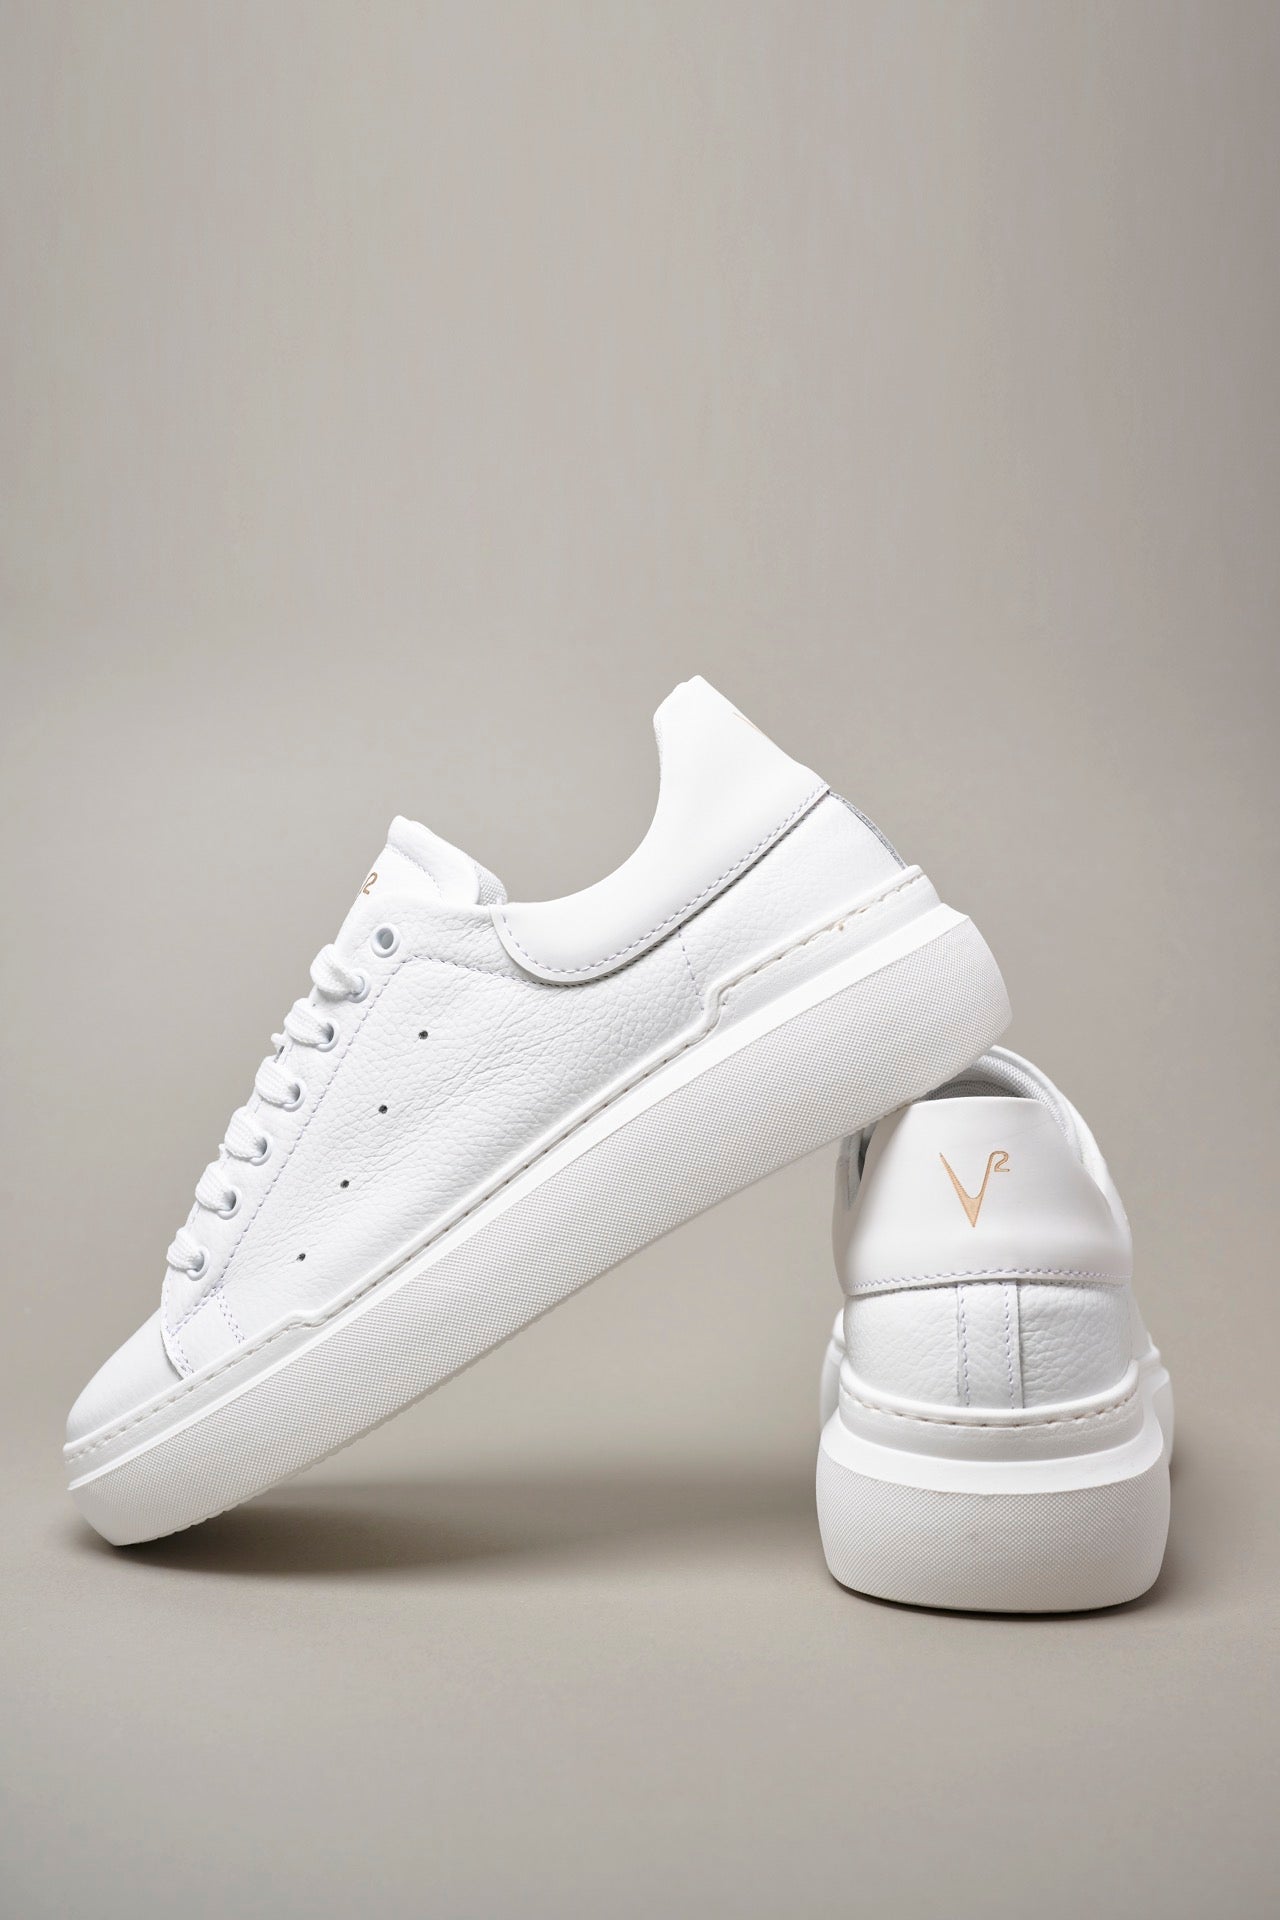 HAMMER - High sole sneakers in textured leather with White back